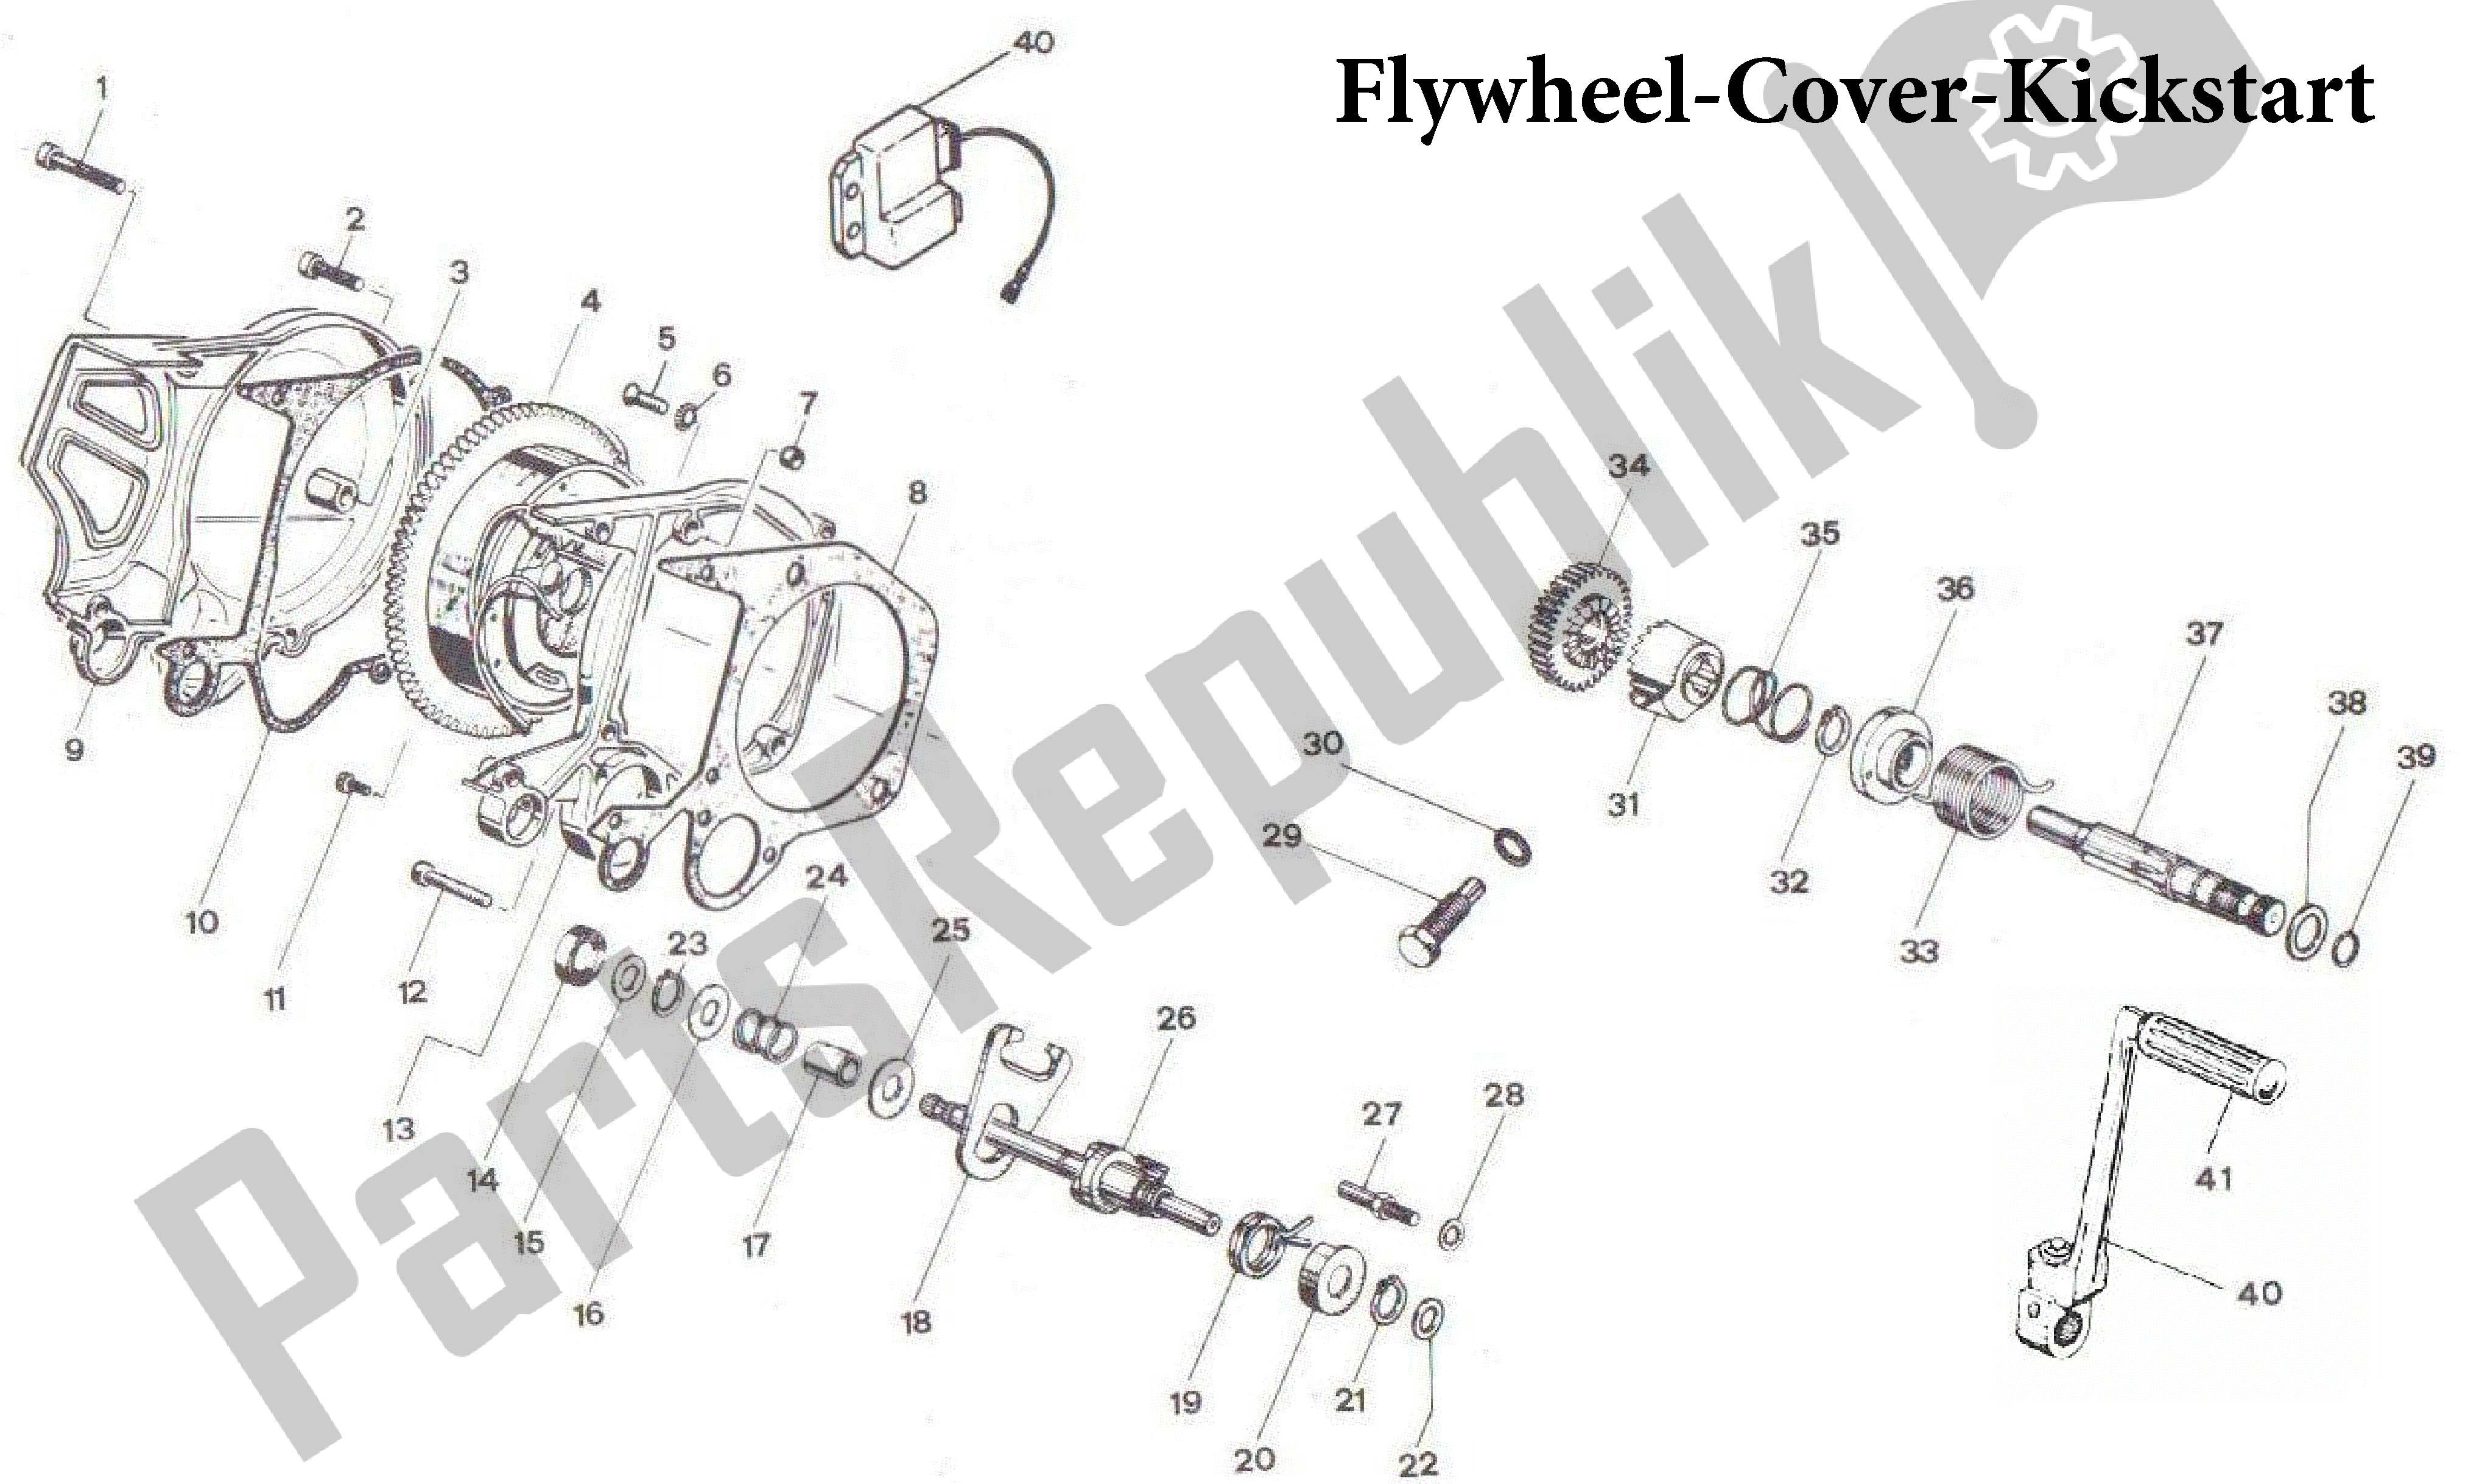 All parts for the Flywheel-cover-kickstart of the Aprilia AF1 50 1990